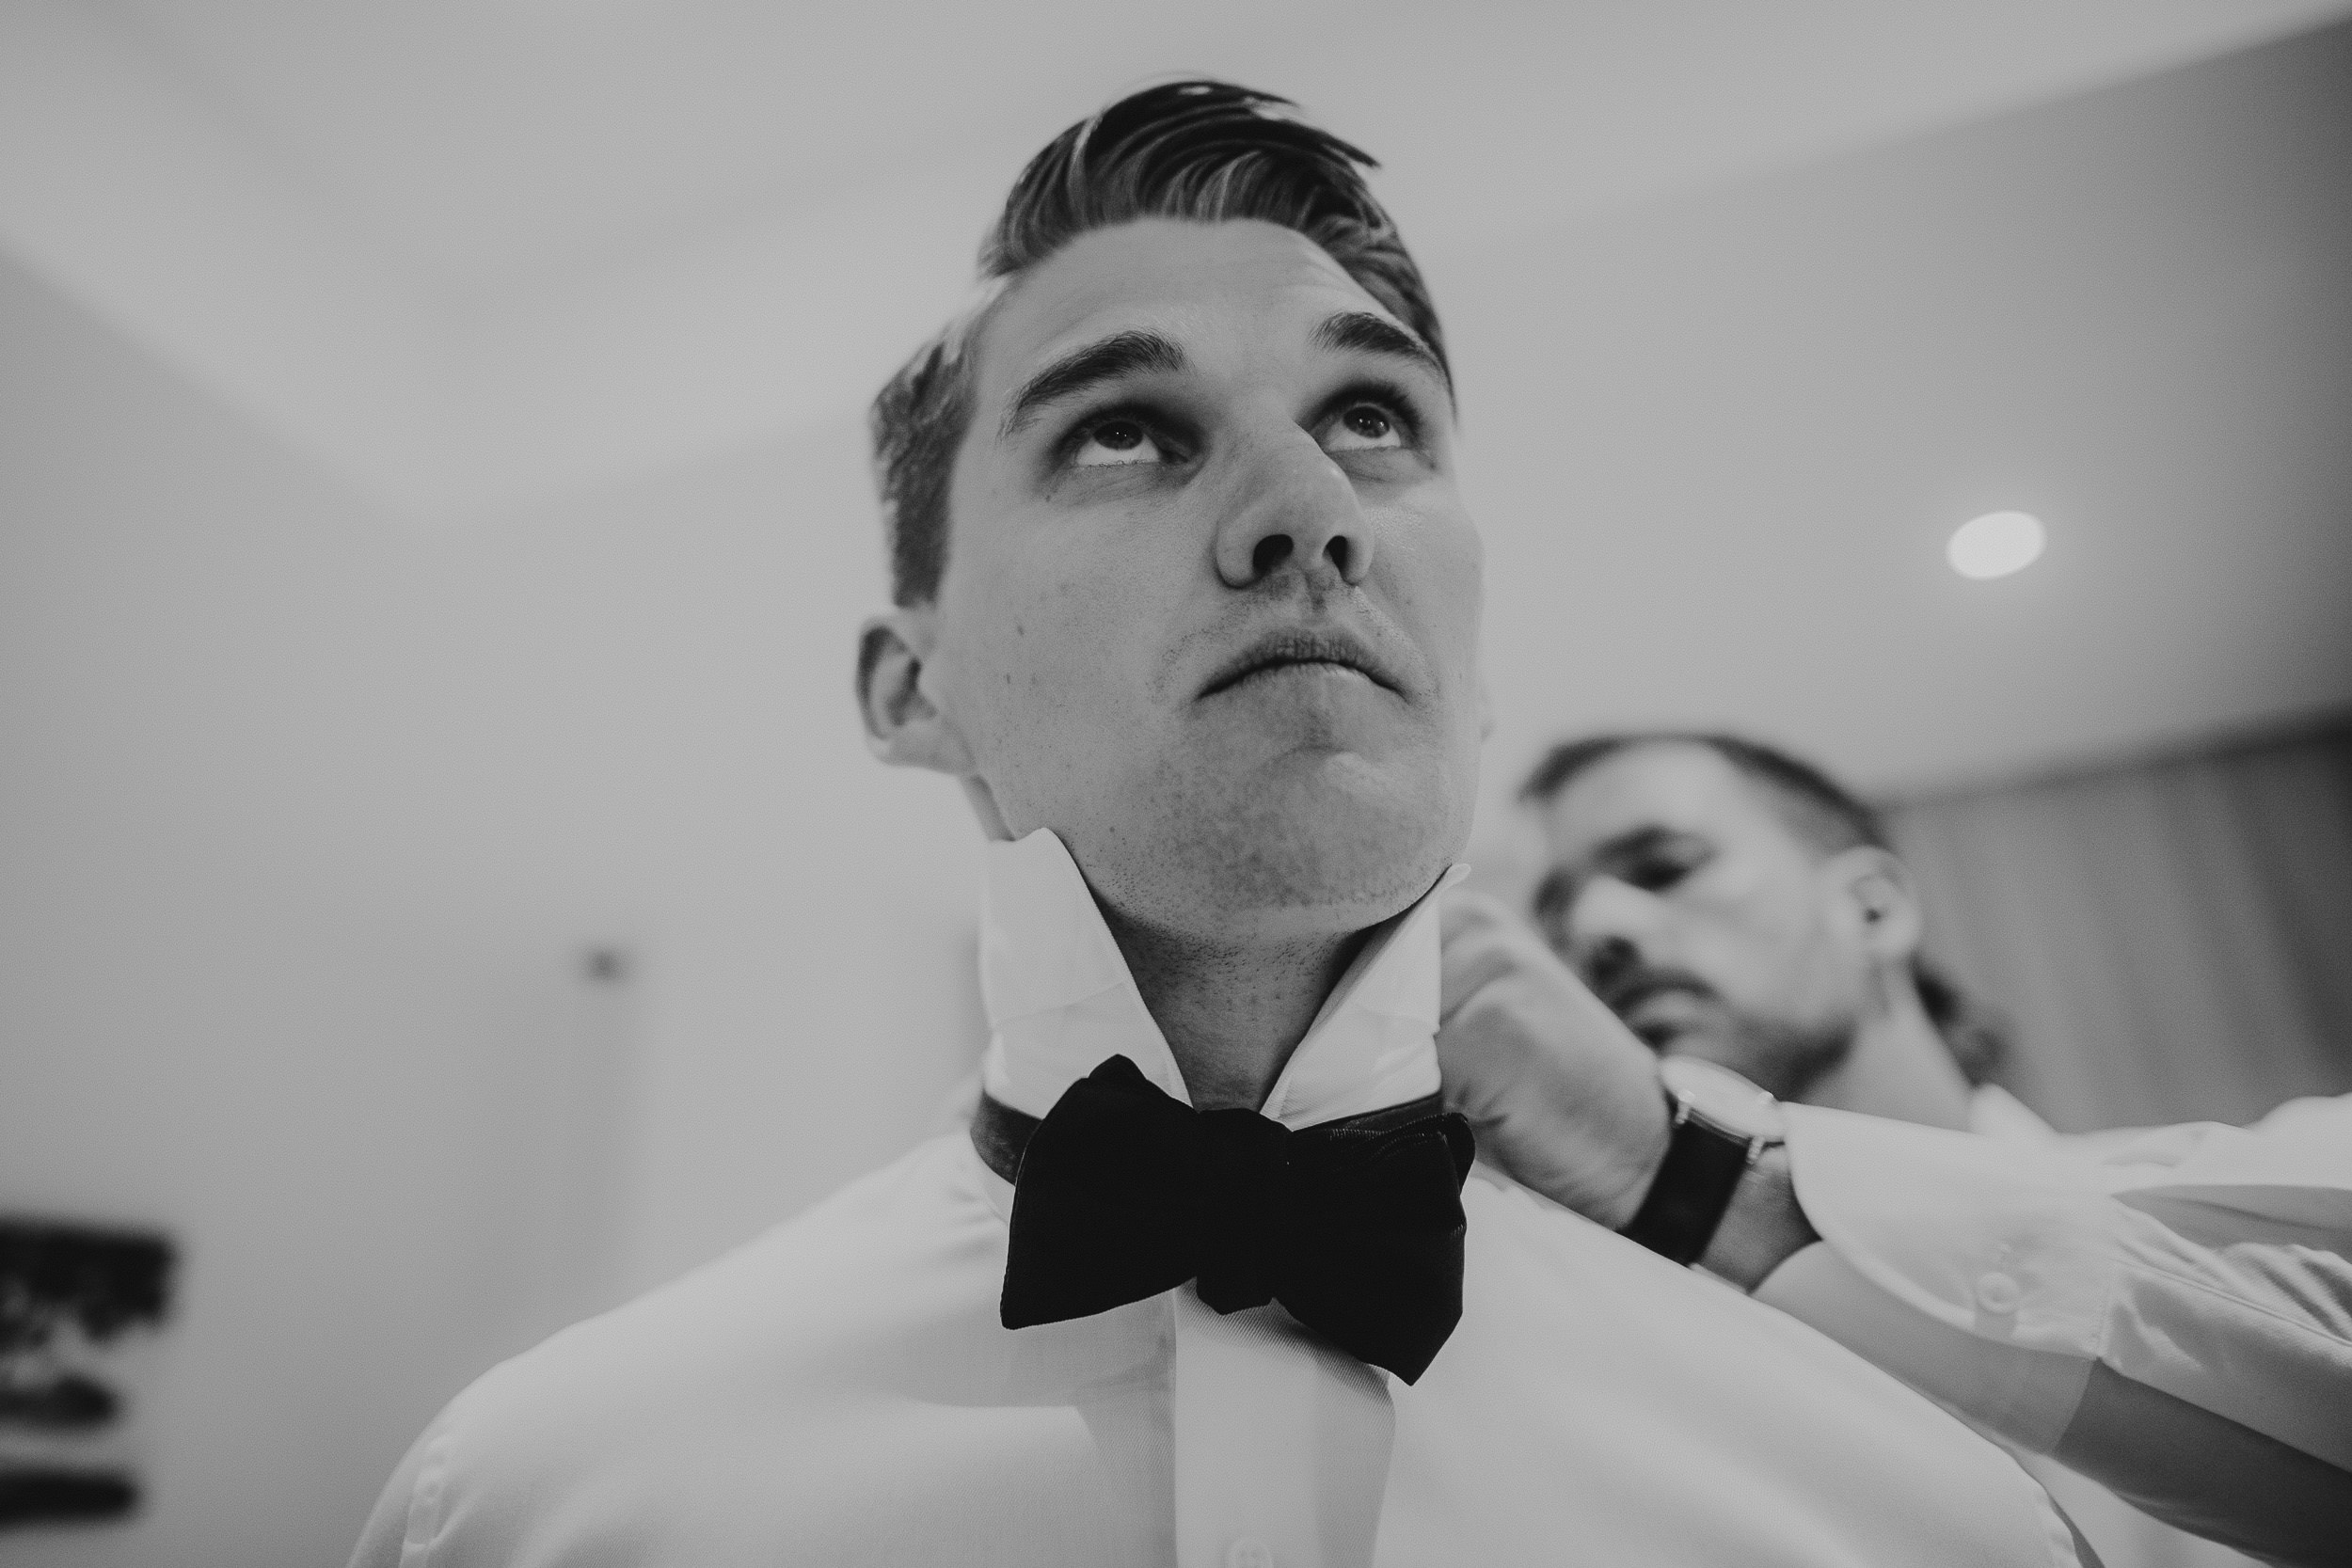 A groom is adjusting his bow tie in a black and white wedding photo.